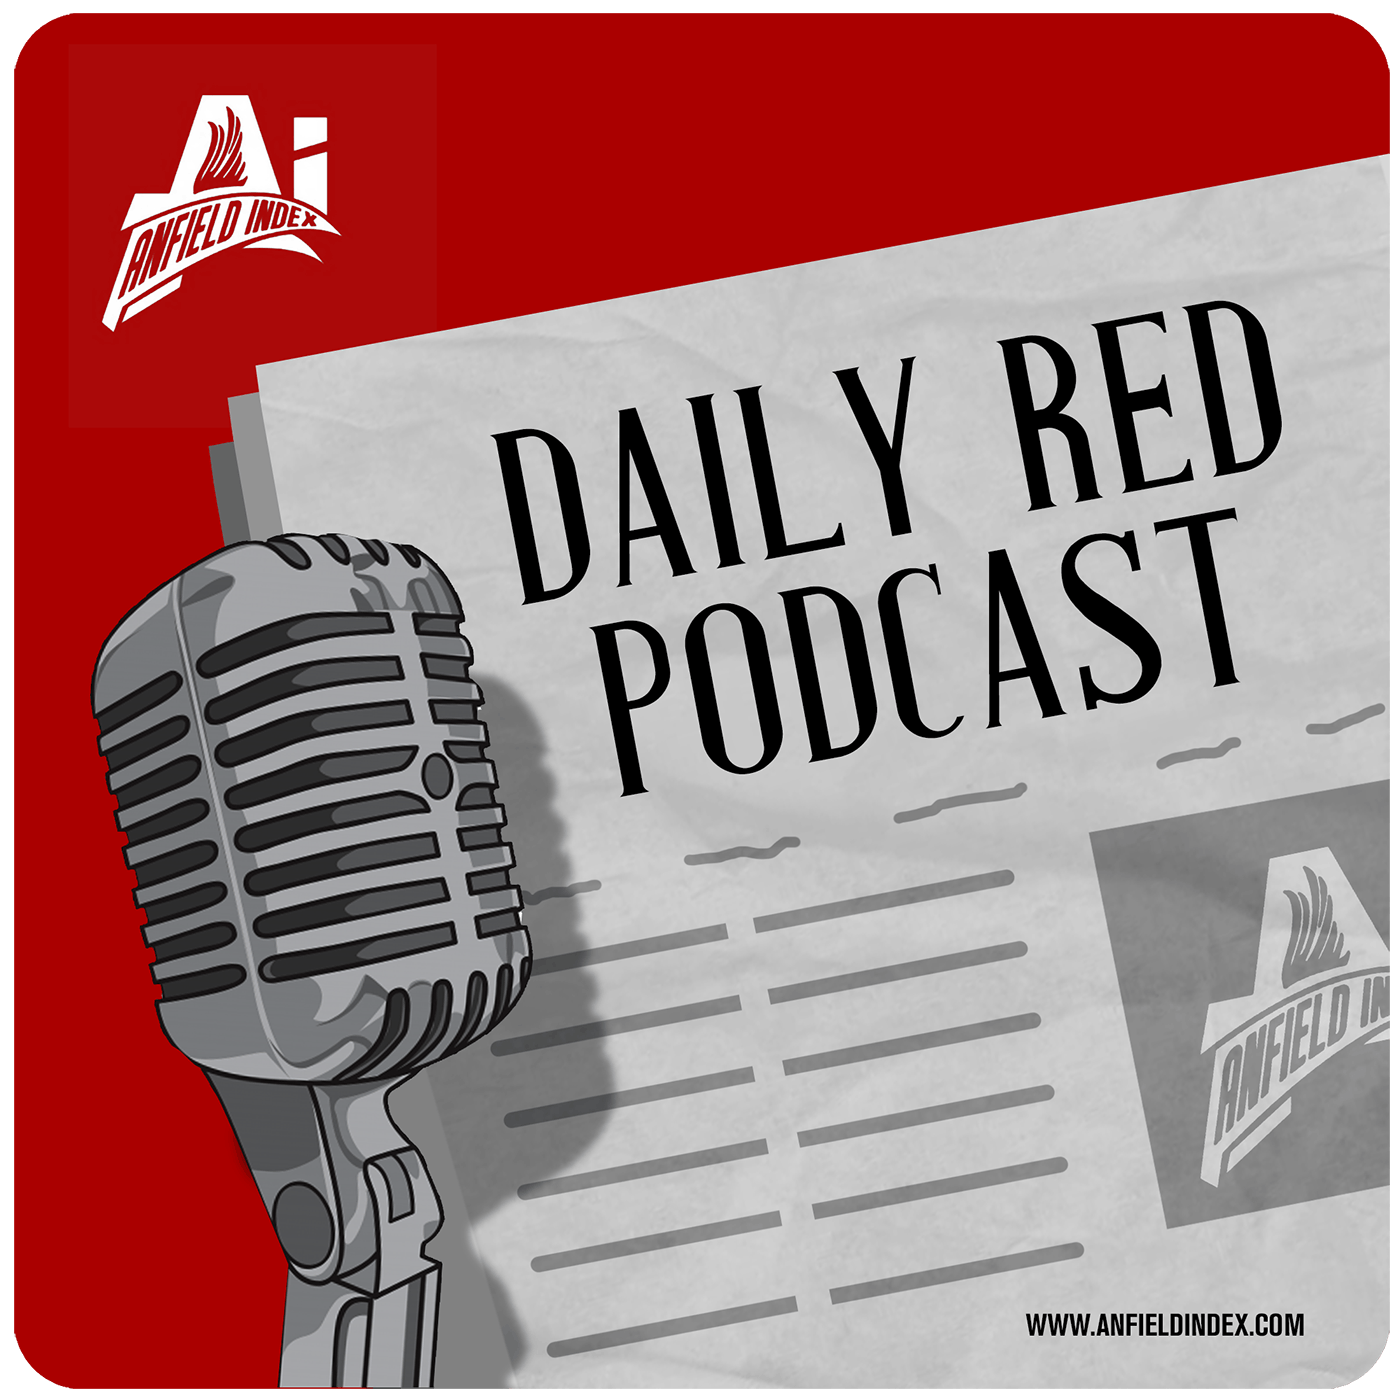 Darwin Discussion - Daily Red Podcast